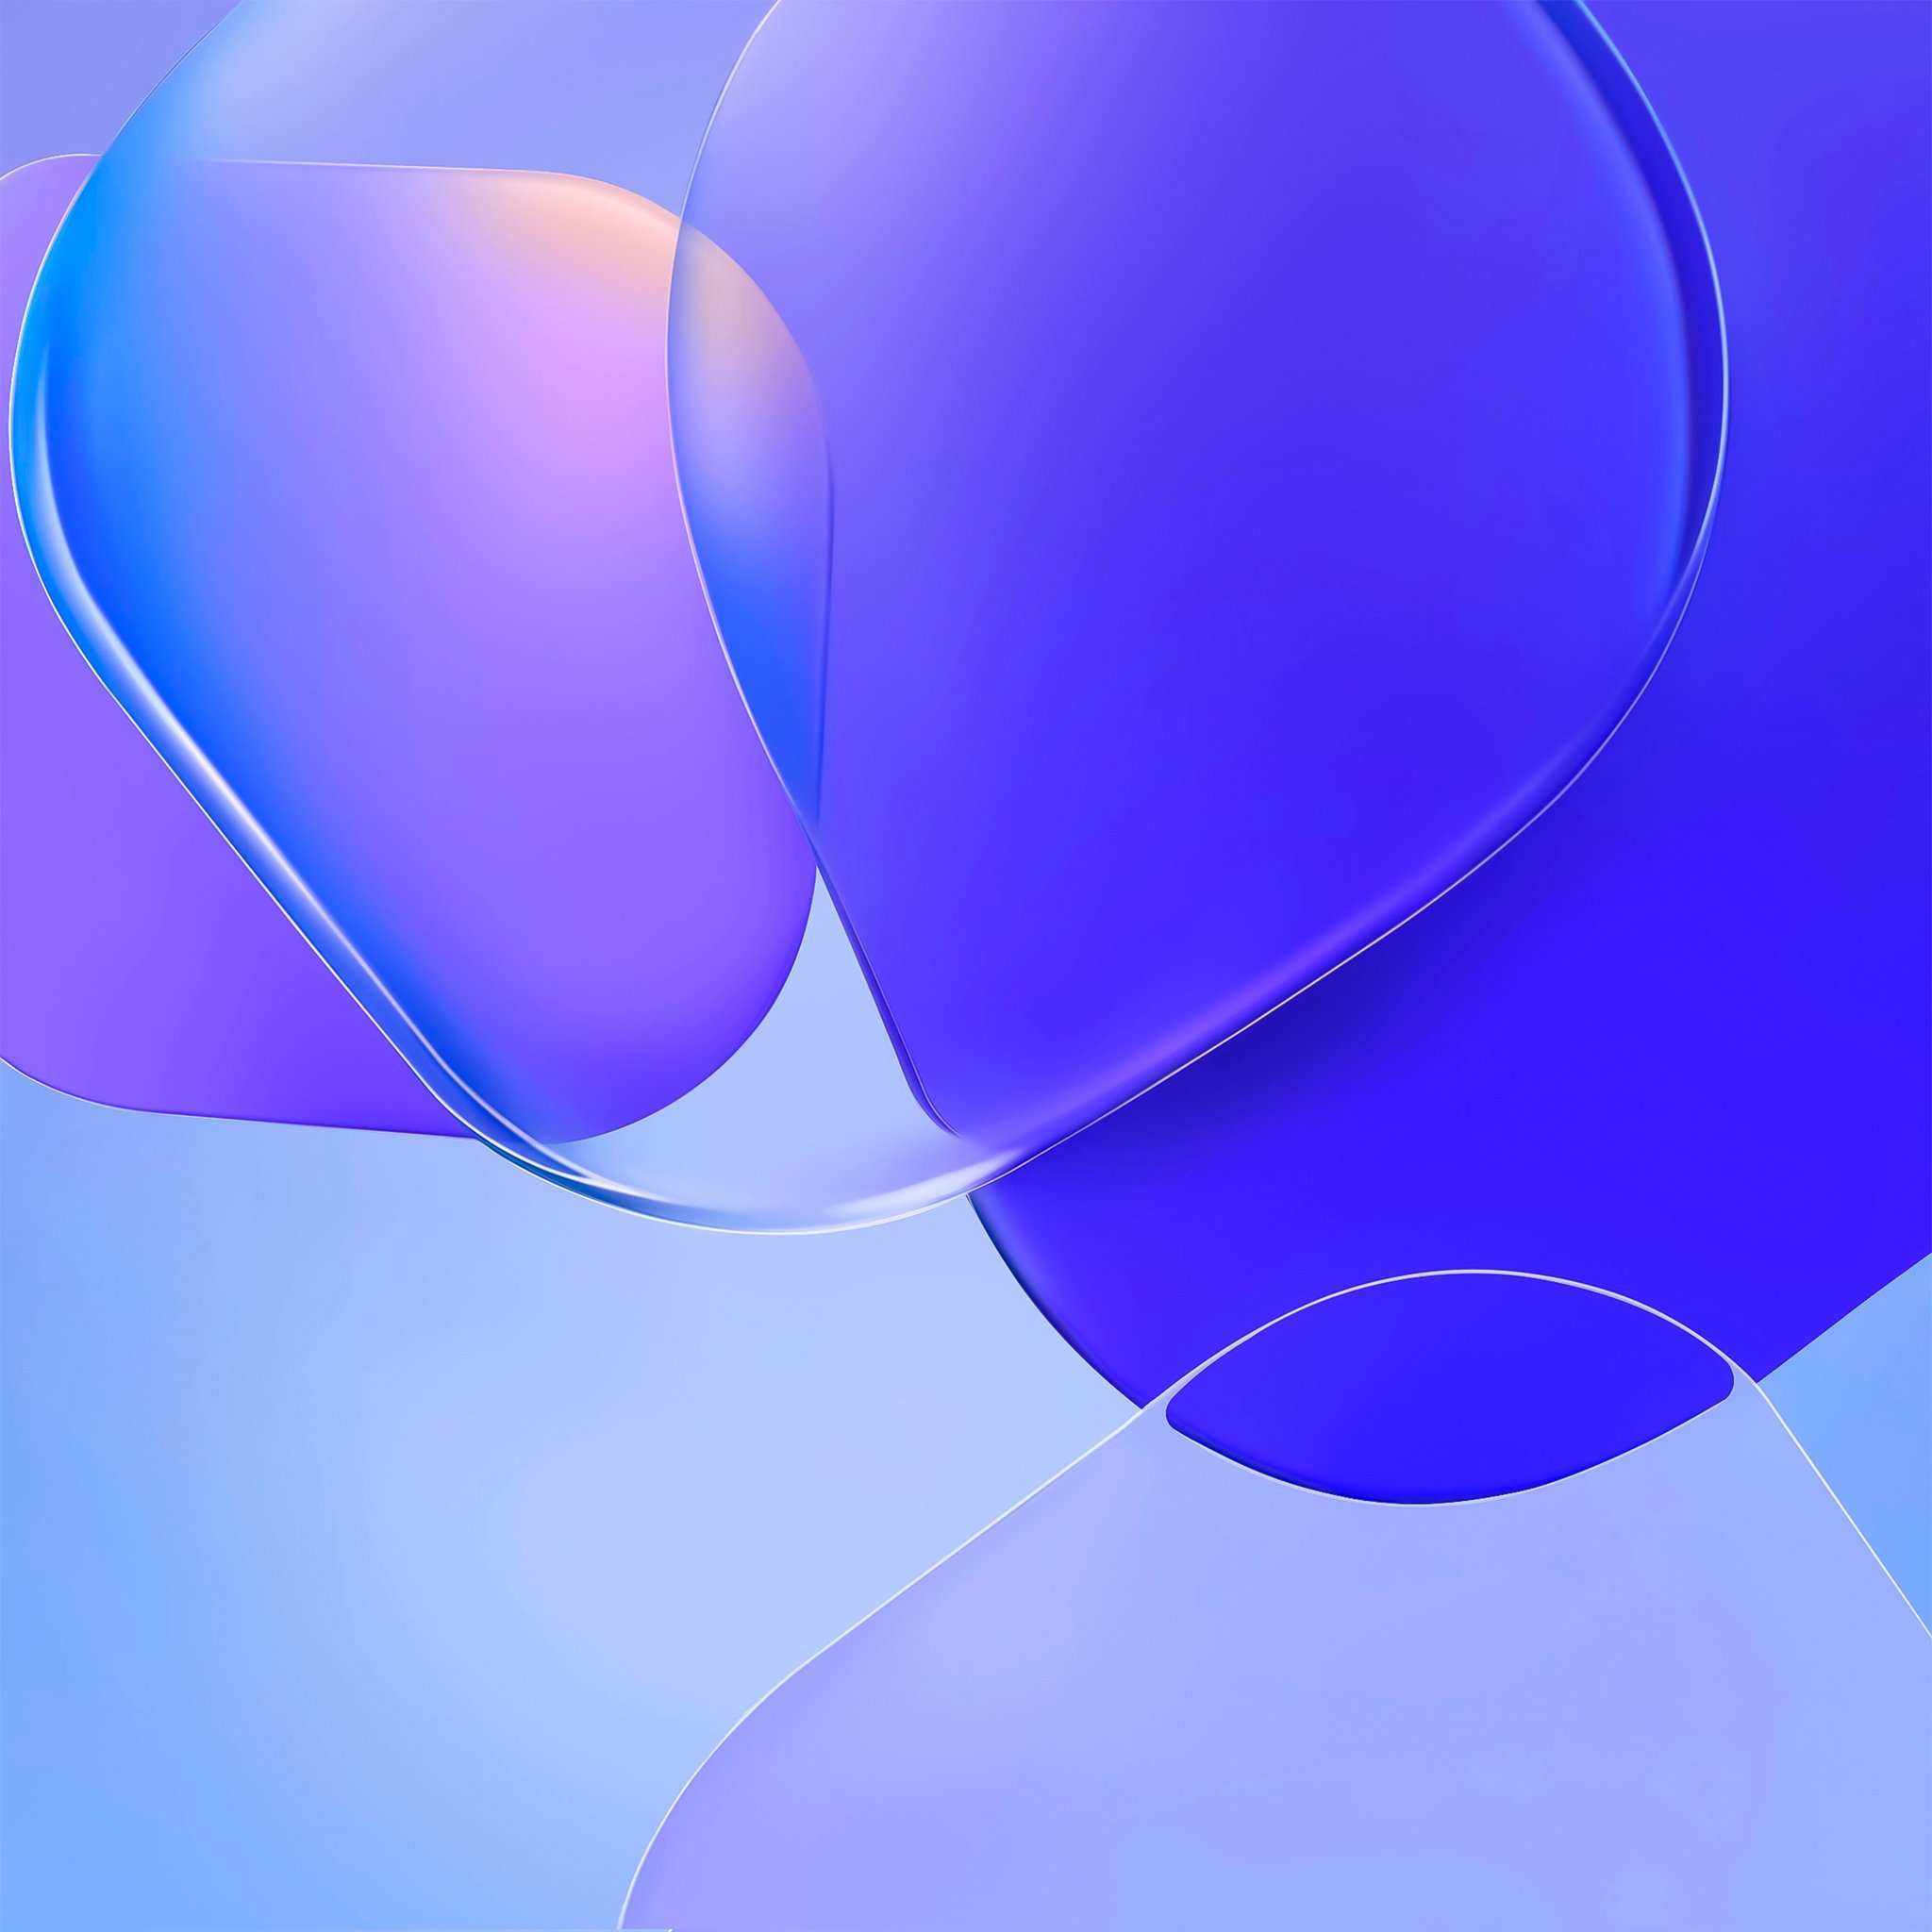 Here are some amazing Wallpapers of HUAWEI Nova 9 Series rHuawei